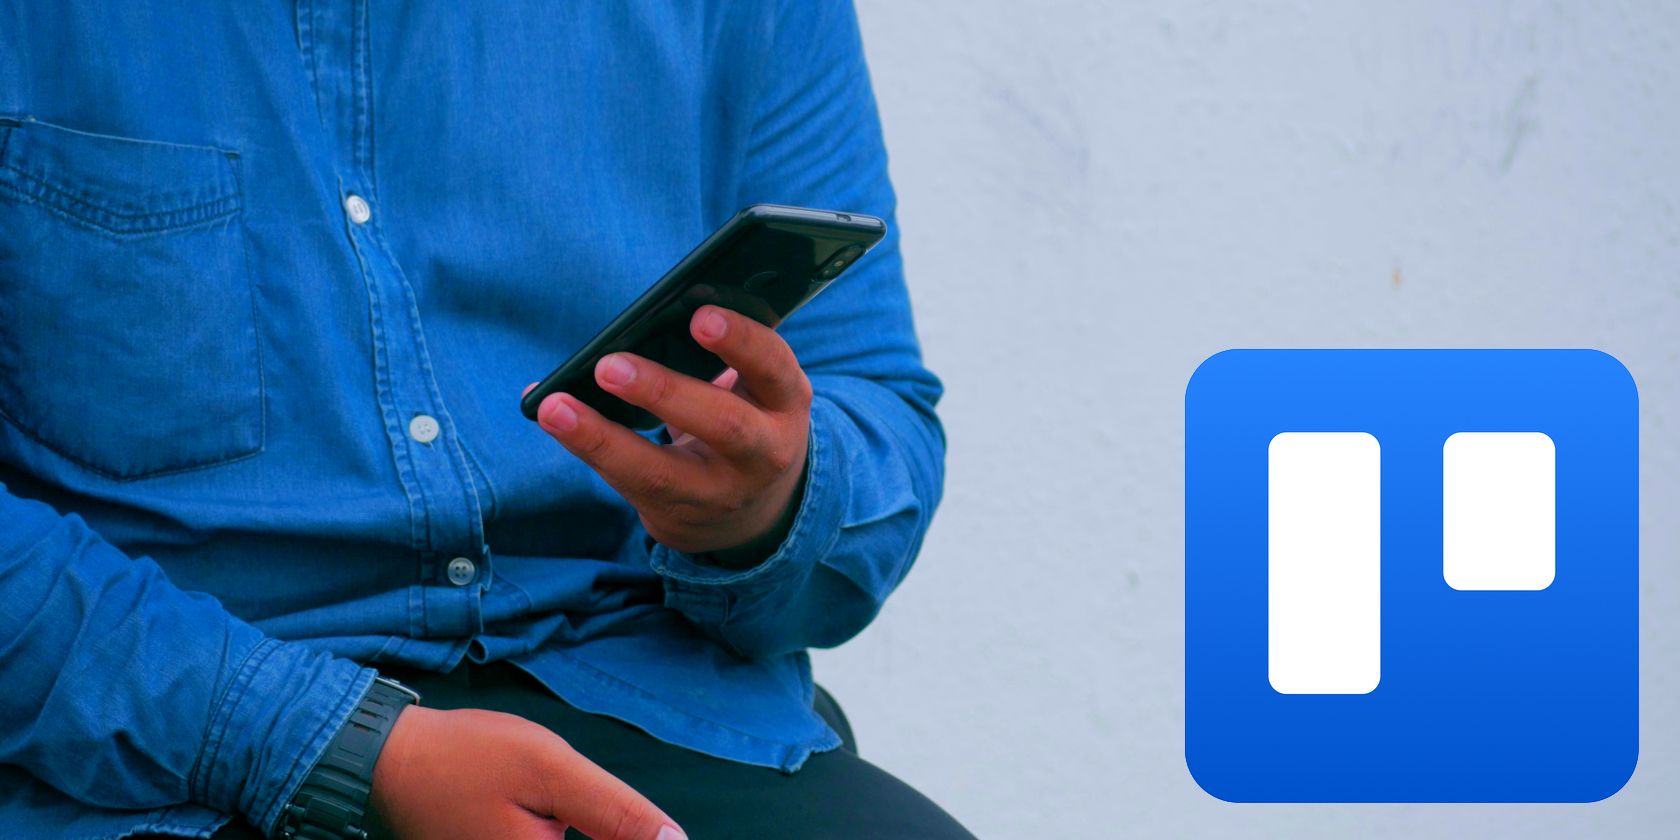 Person wearing a denim jacket holding a phone, with the Trello app icon to the right.